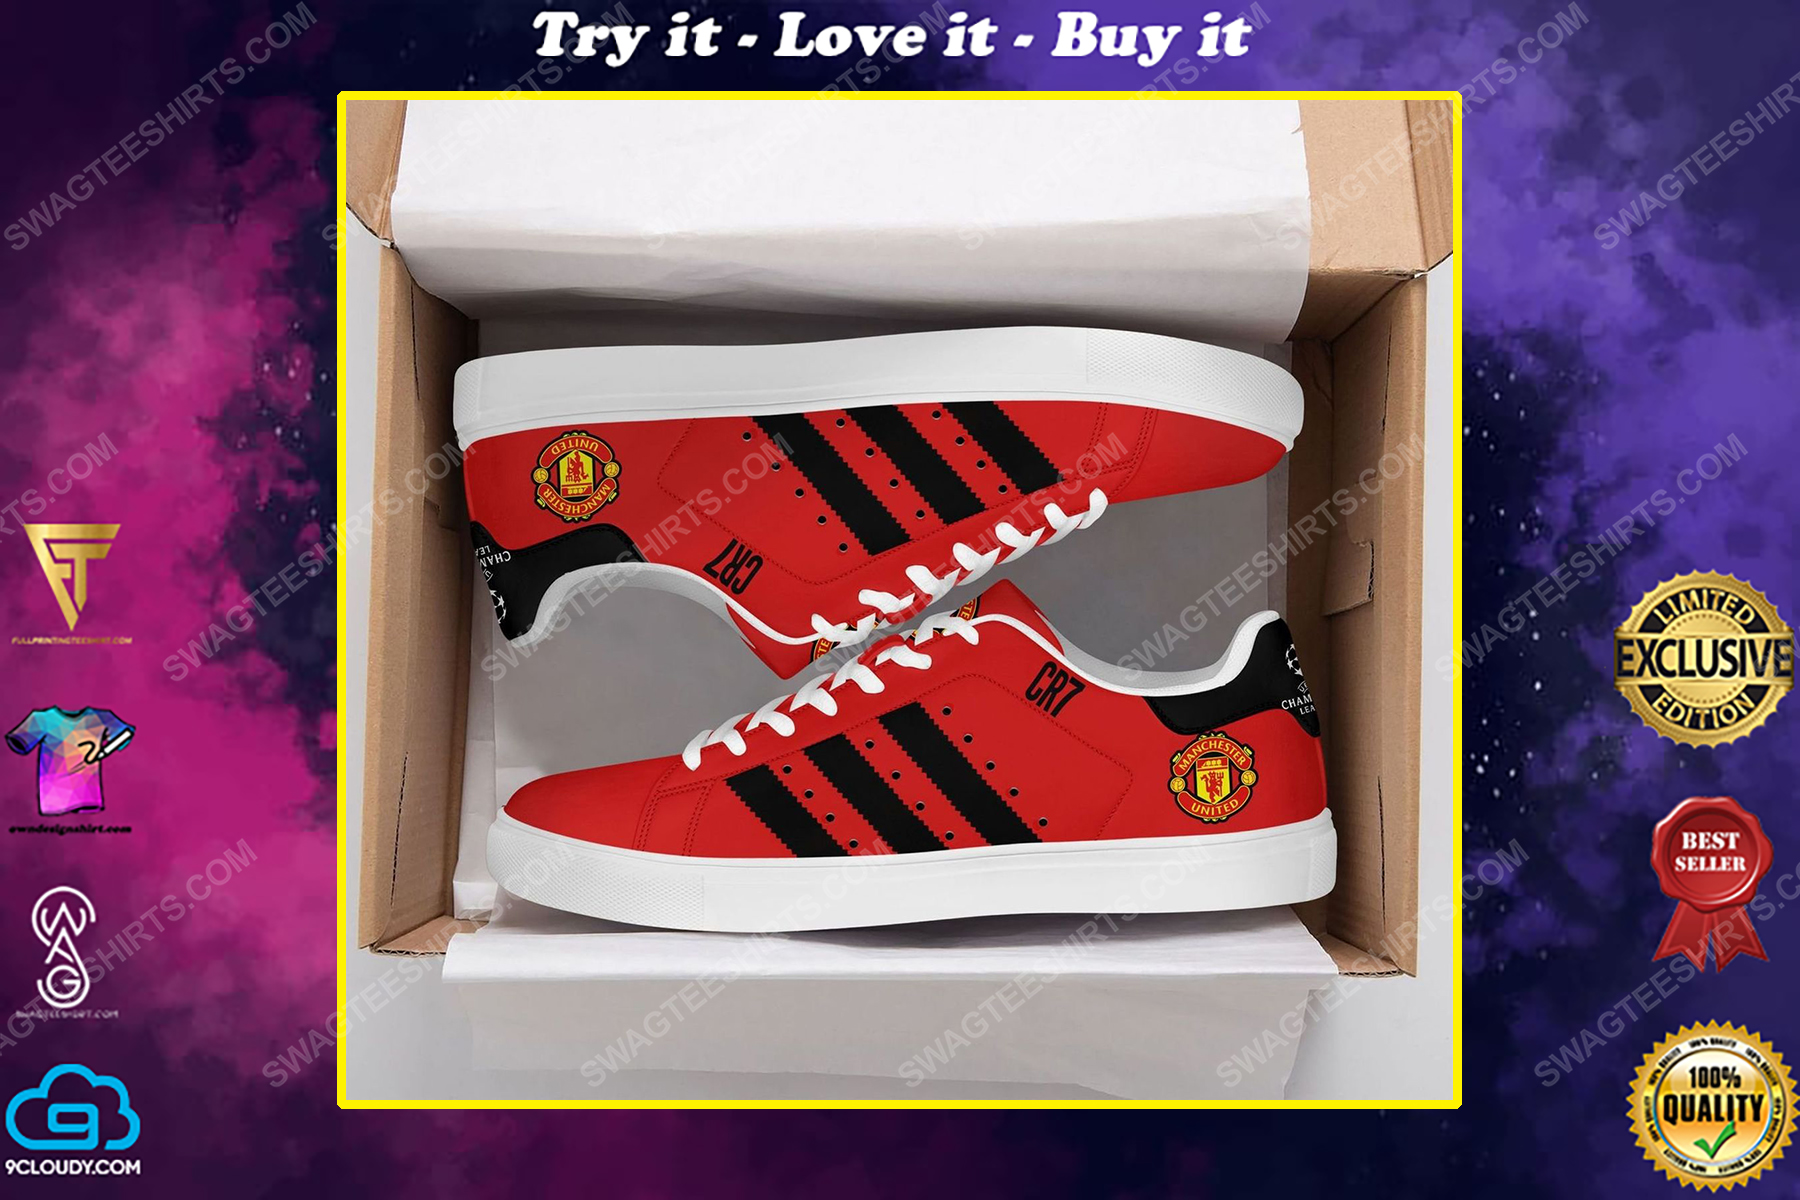 Manchester united football club black stripe stan smith shoes